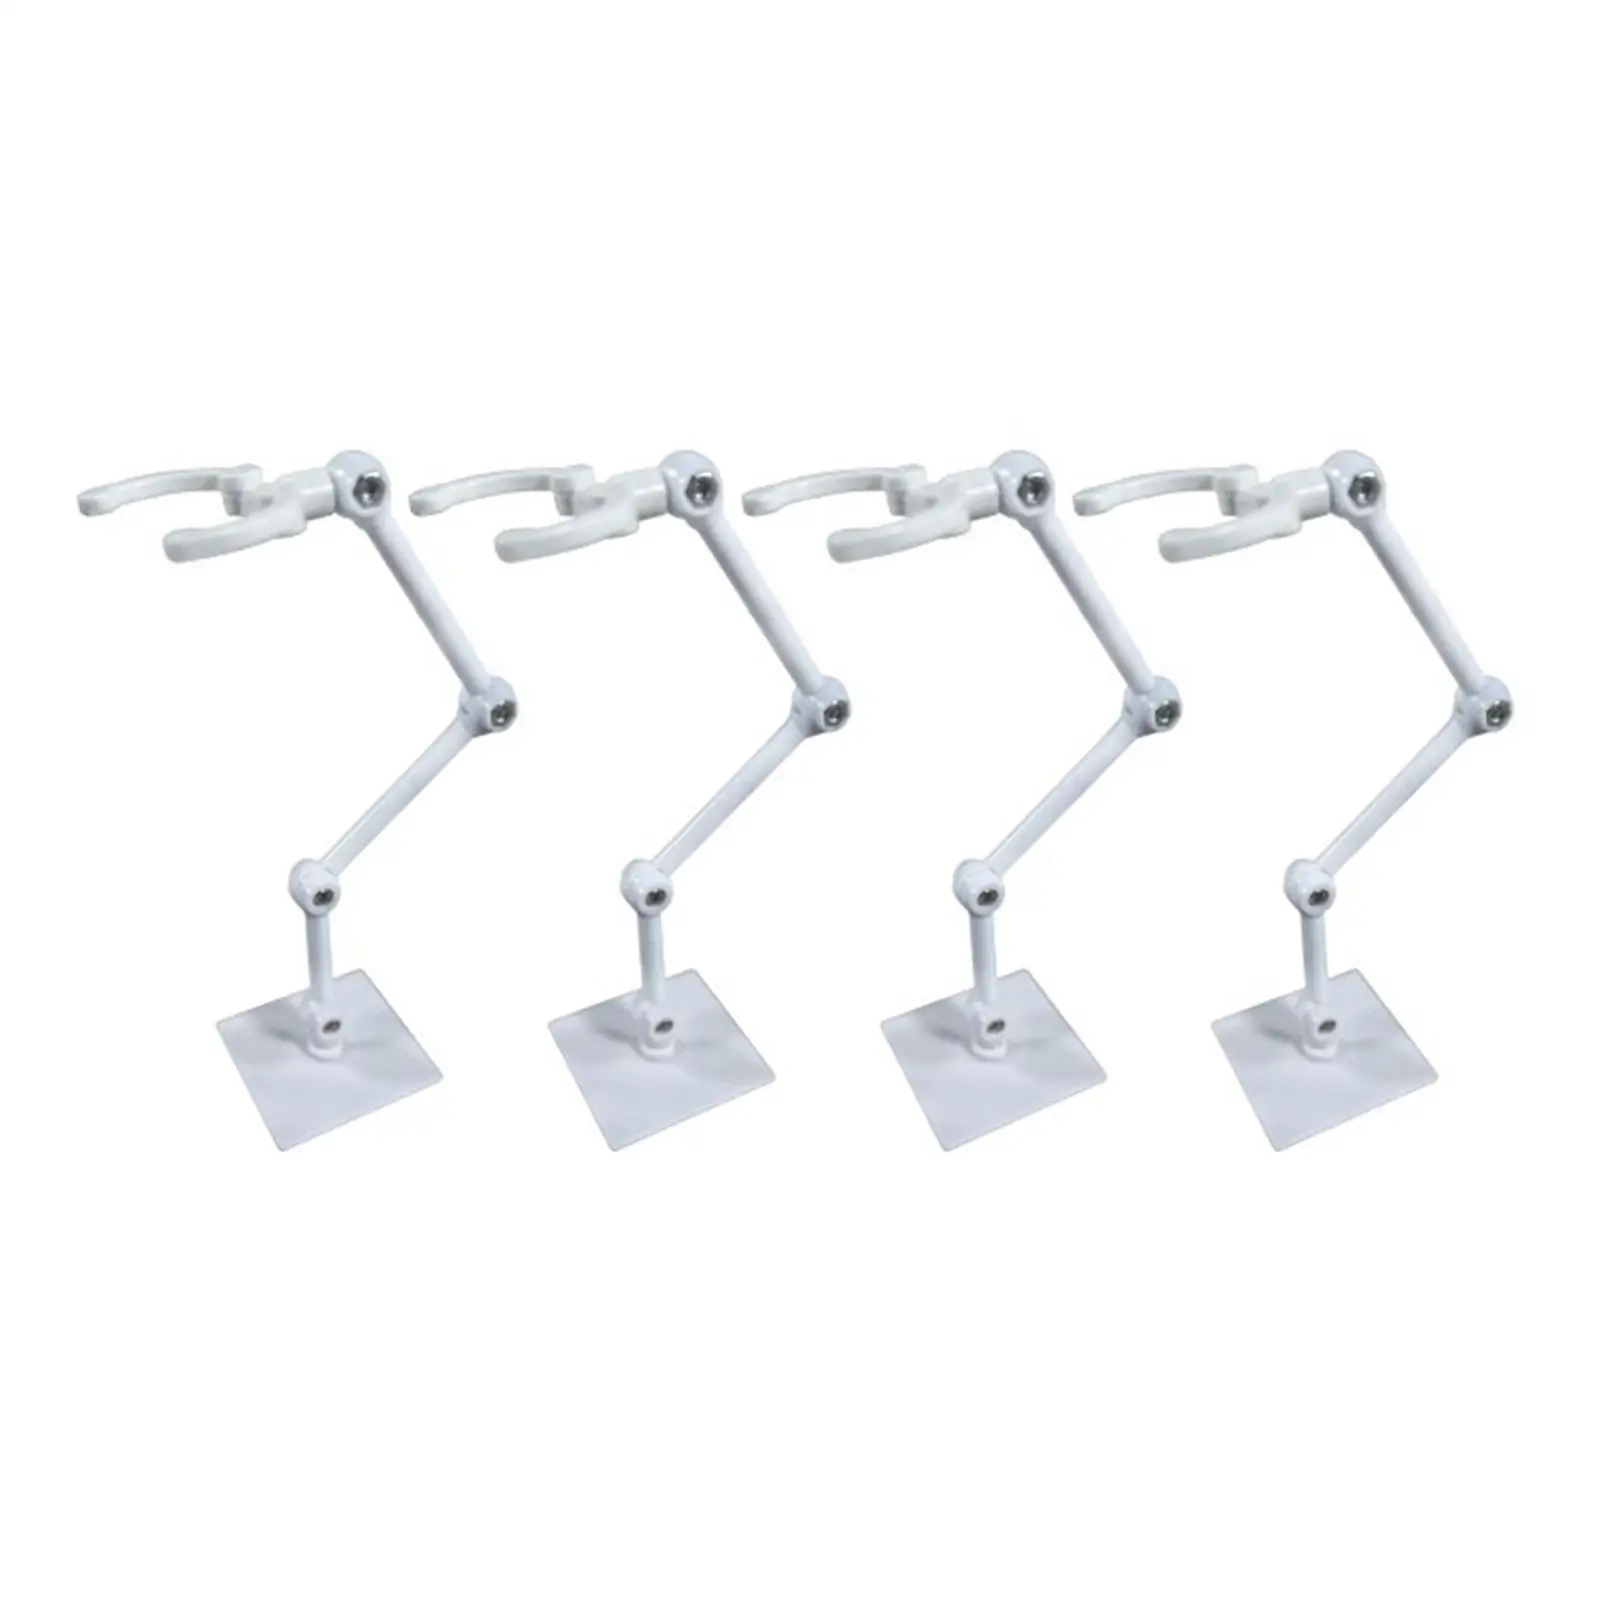 Hobby Action Base Display Stand Adjustable Angle Holder for 6`` inch Doll